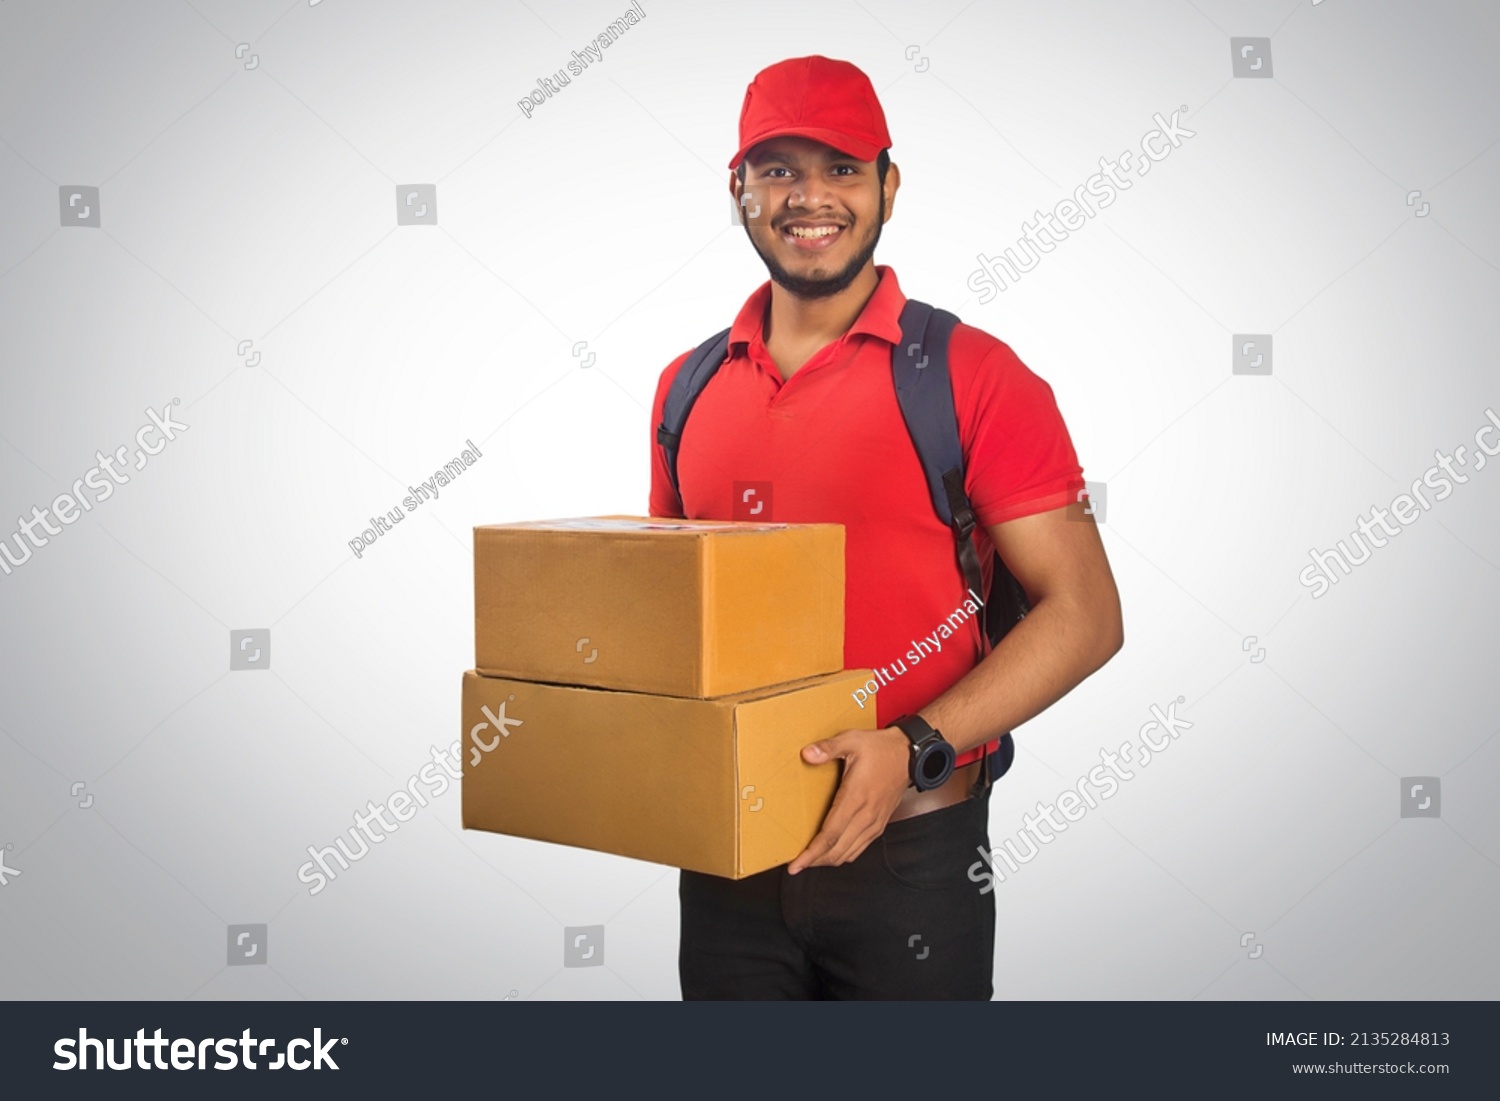 Portrait Of Young Delivery Man Holding Cardboard Box Against Grey Background #2135284813